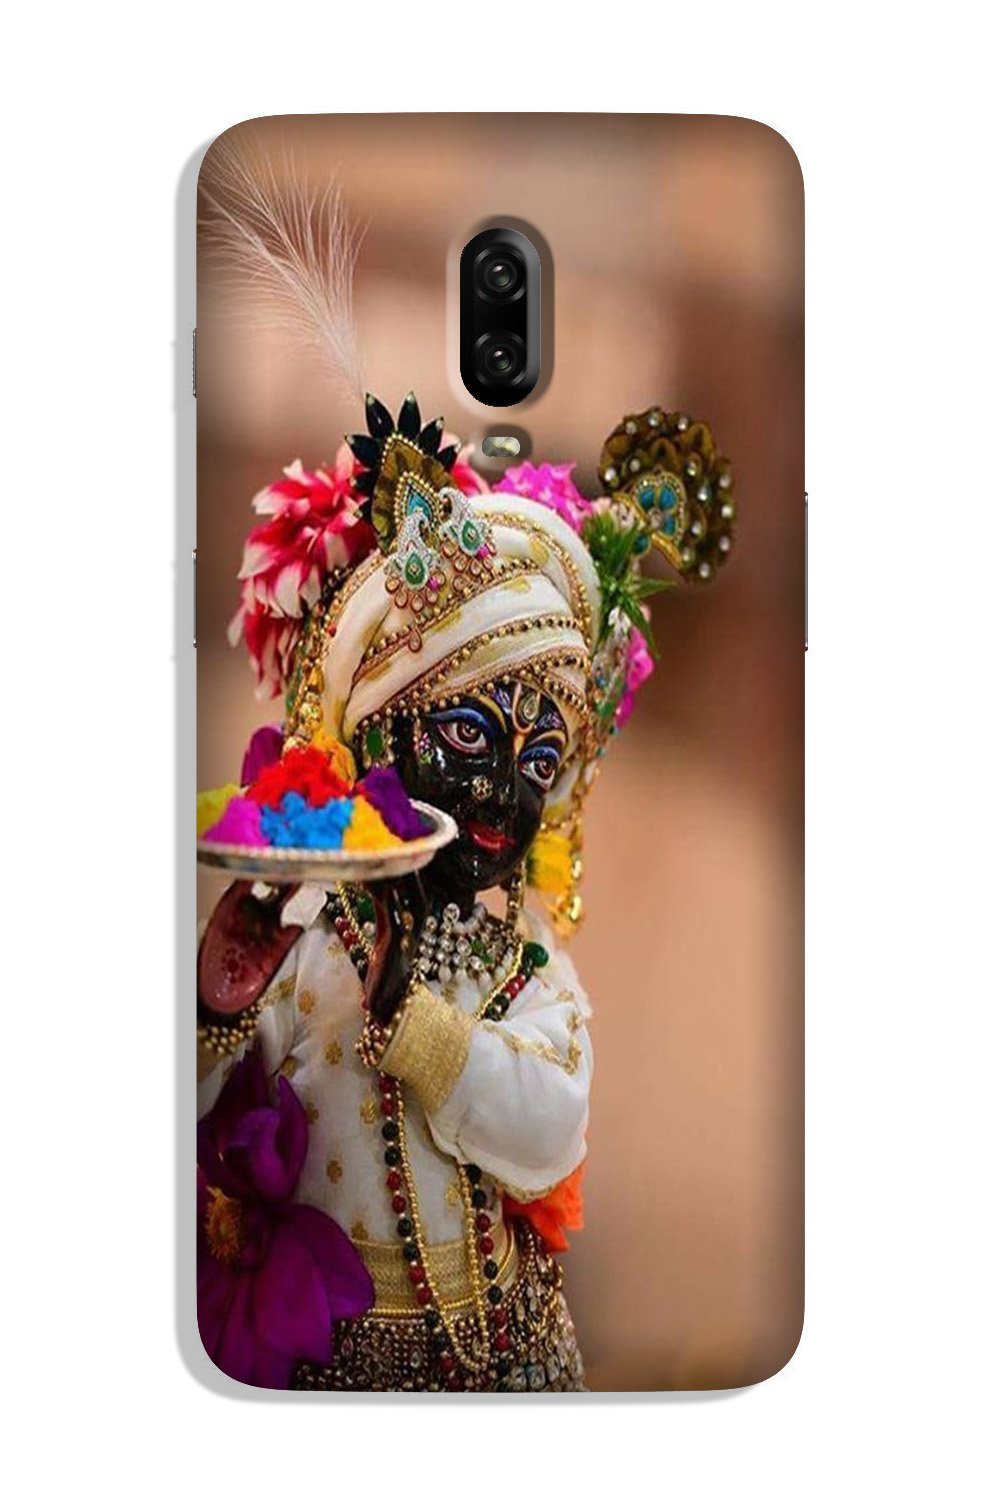 Lord Krishna2 Case for OnePlus 7